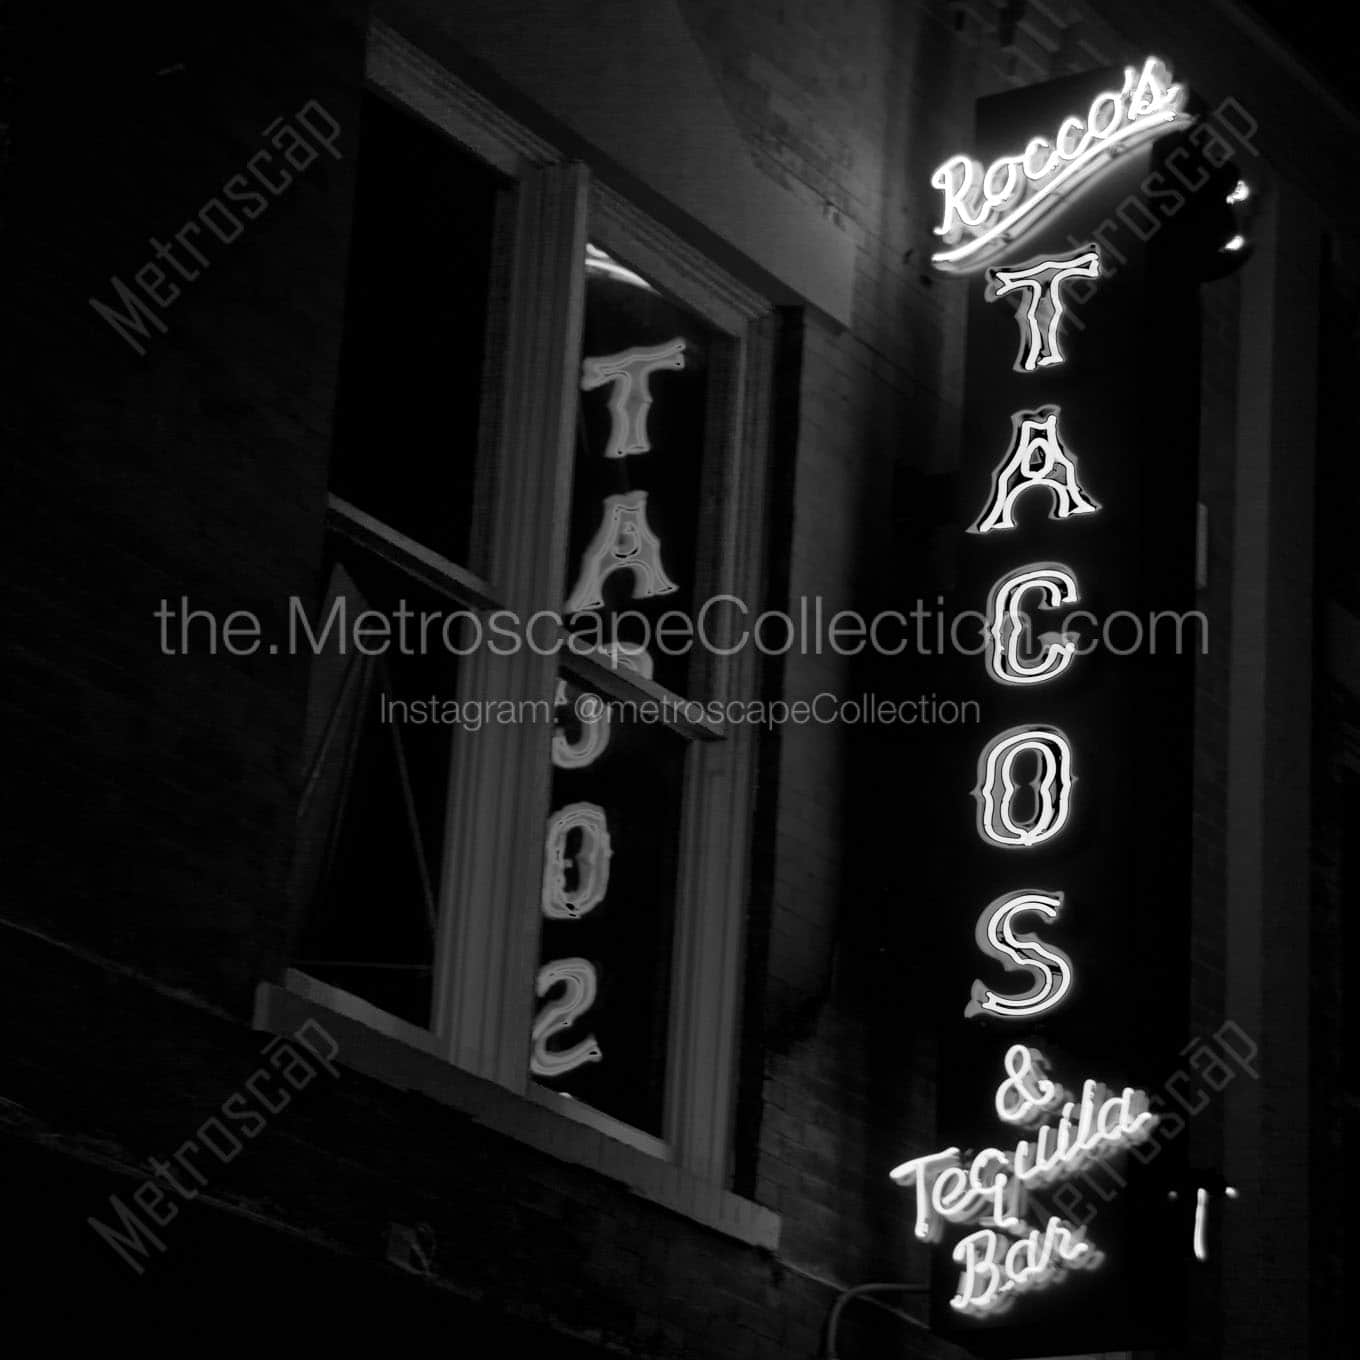 roccos tacos and tequila bar Black & White Wall Art